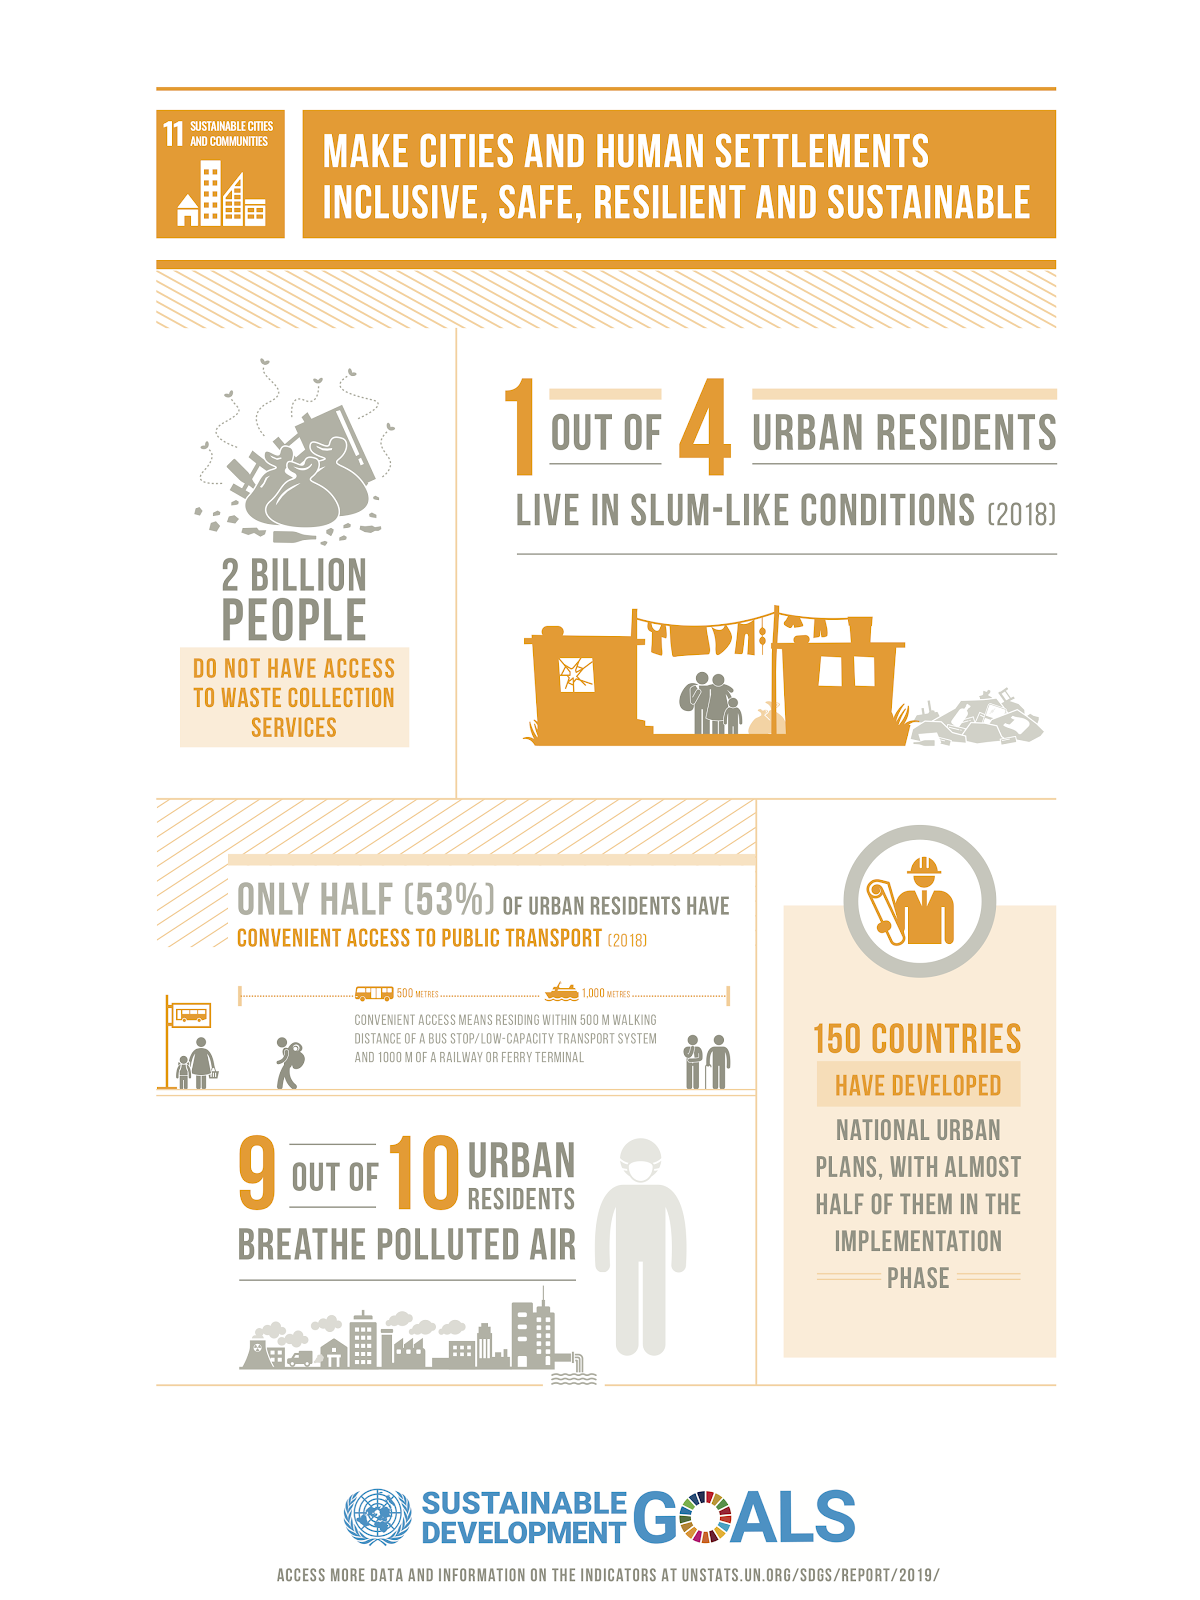 U.N. to make sustainable cities and communities | A.R. Marketing House